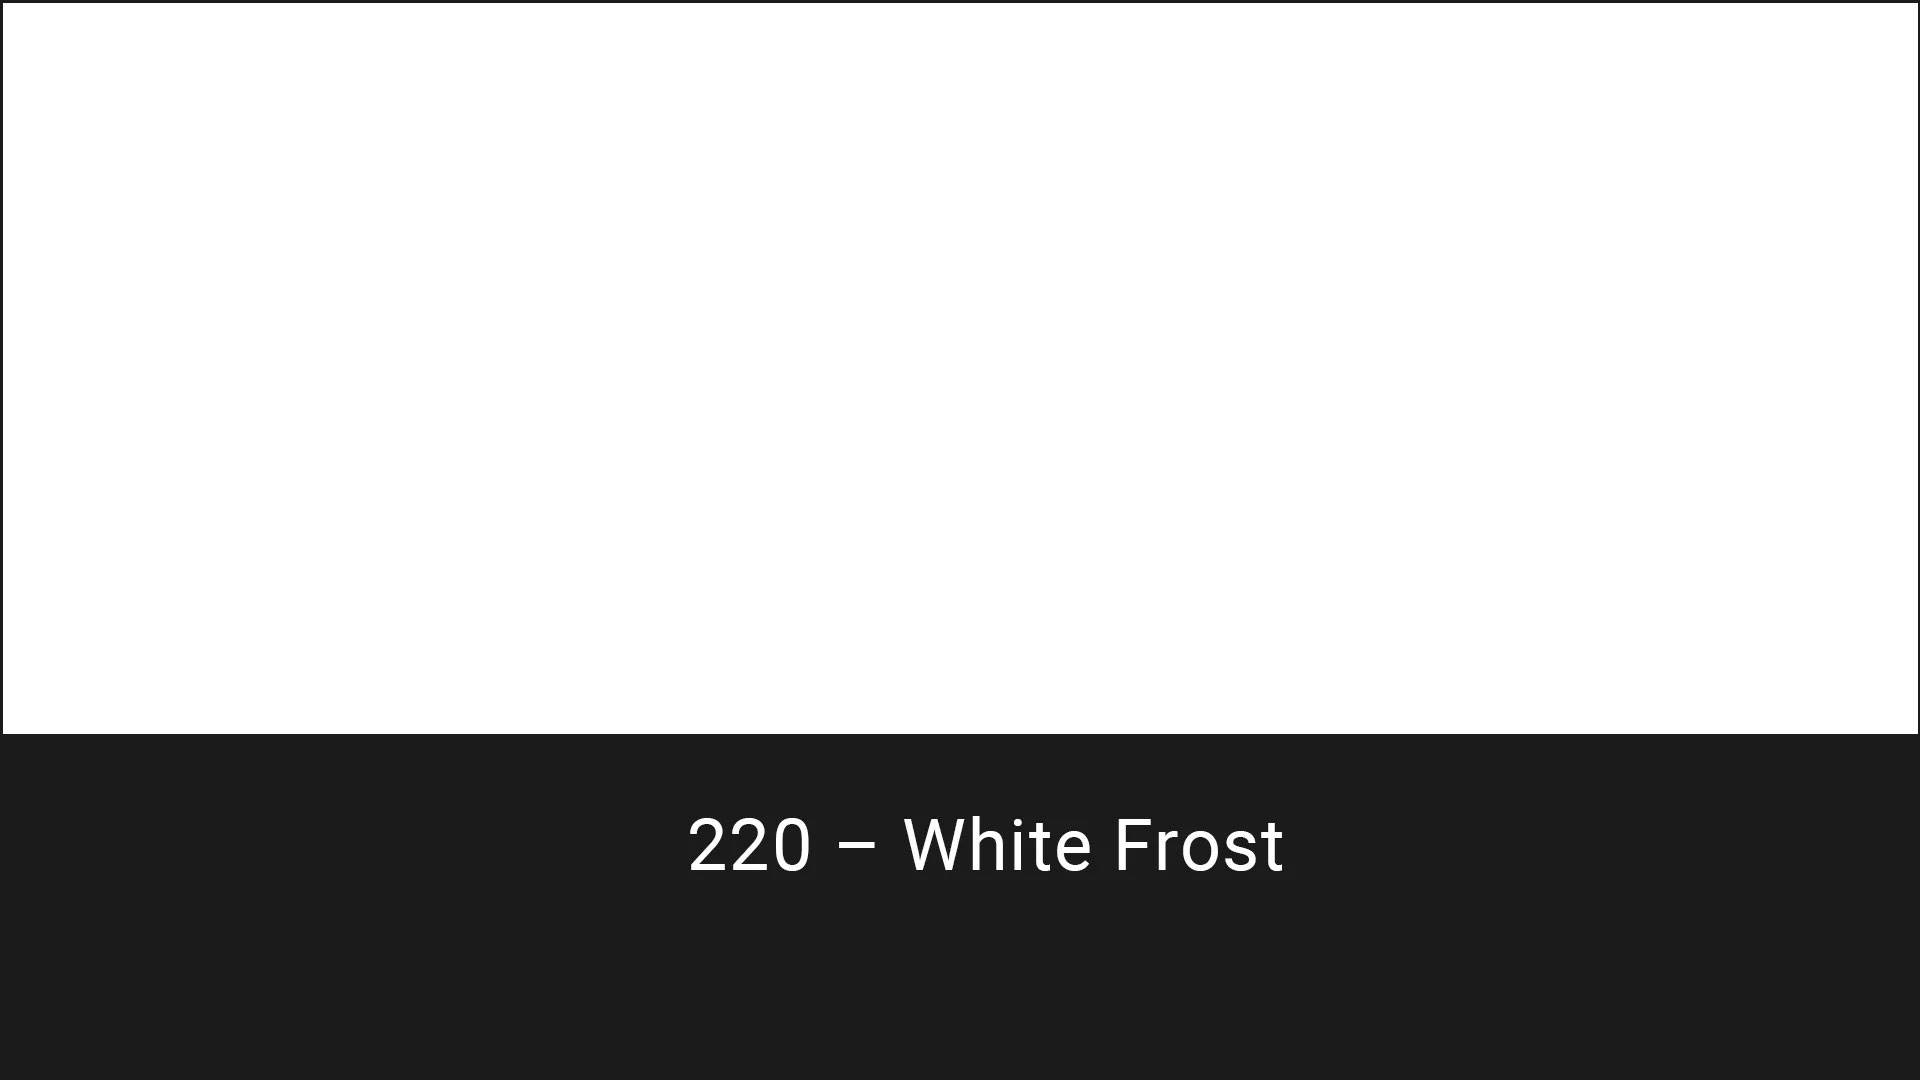 Cotech filters 220 White Frost